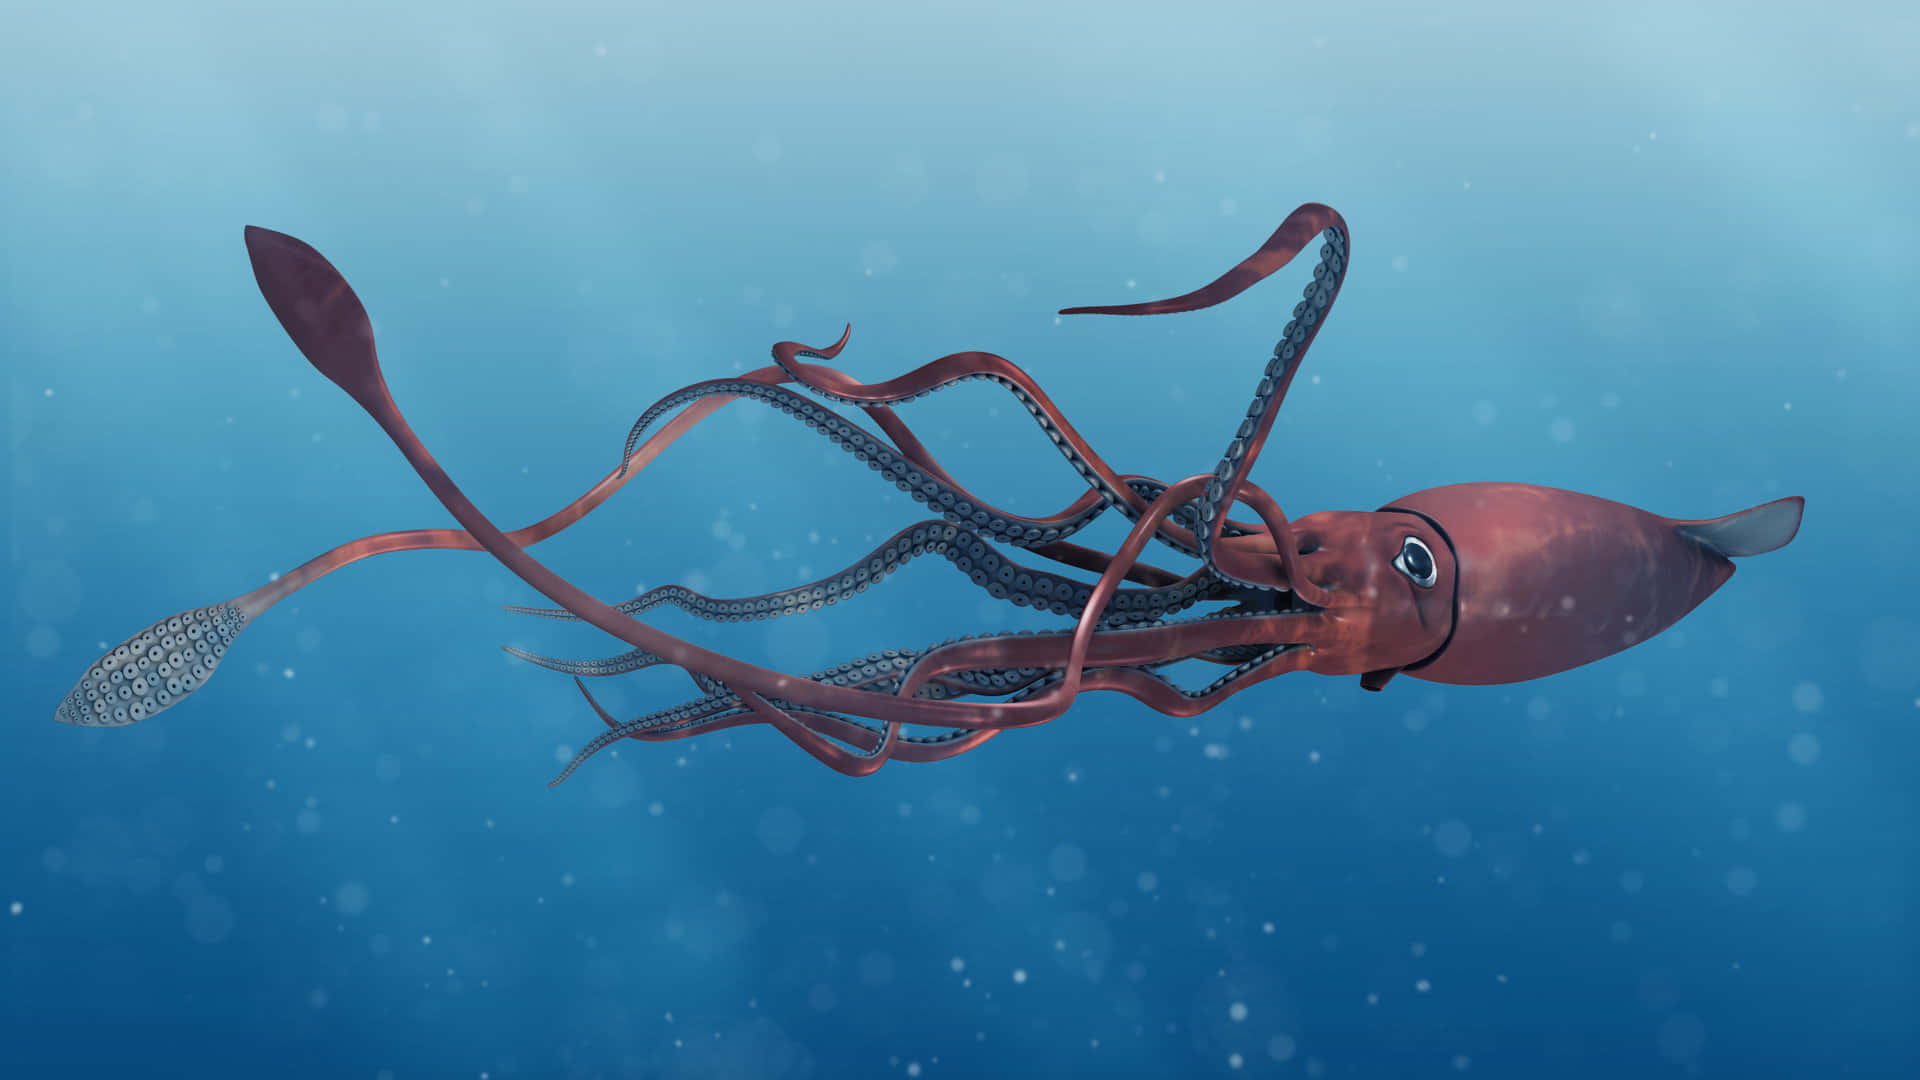 A Giant Squid drifting in the depths of the ocean.